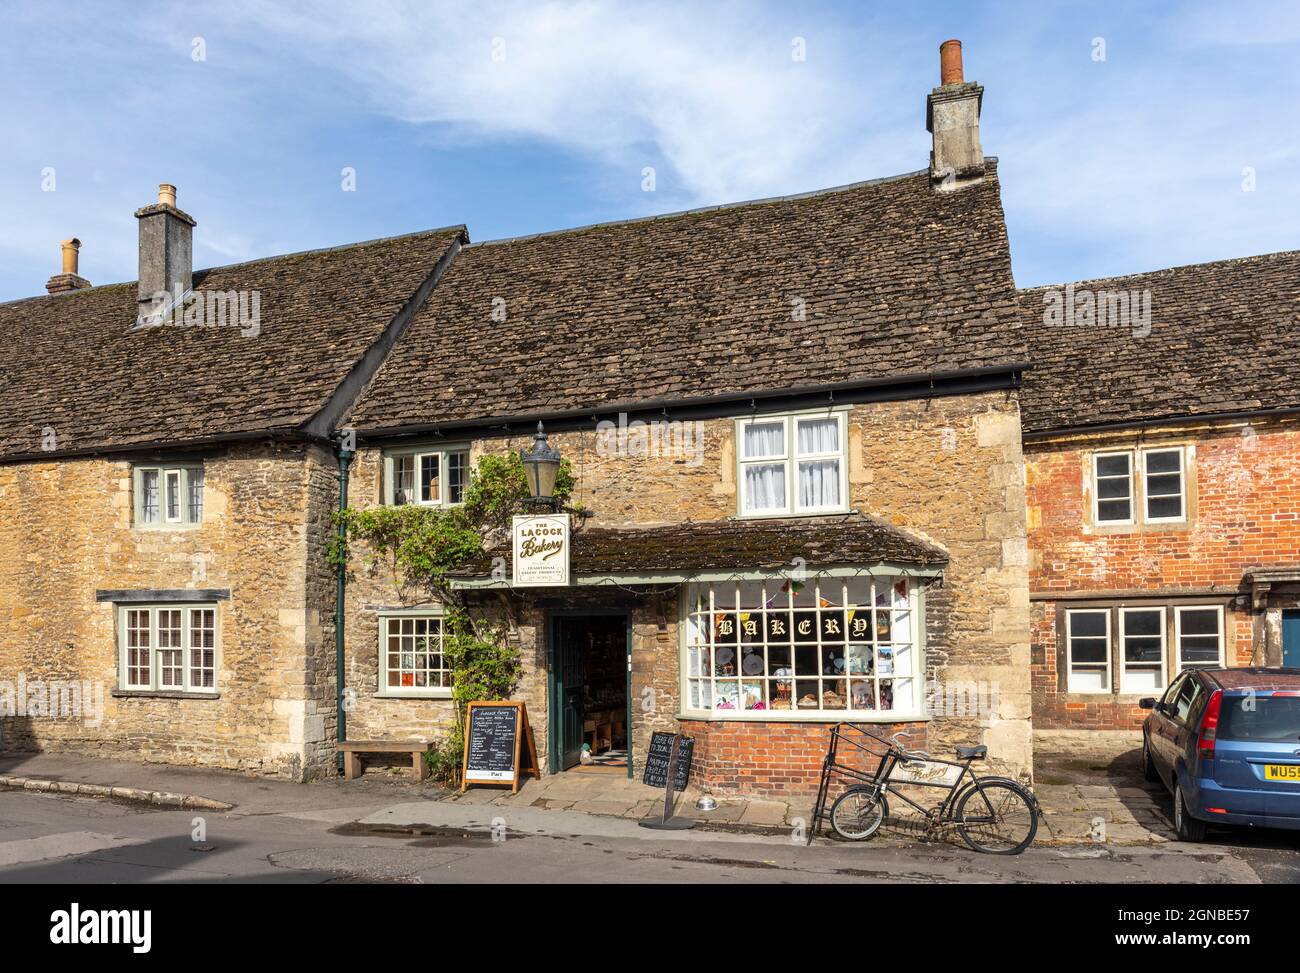 The picturesque Lacock Bakery, Church Street, Lacock village, Wiltshire, England, UK Stock Photo